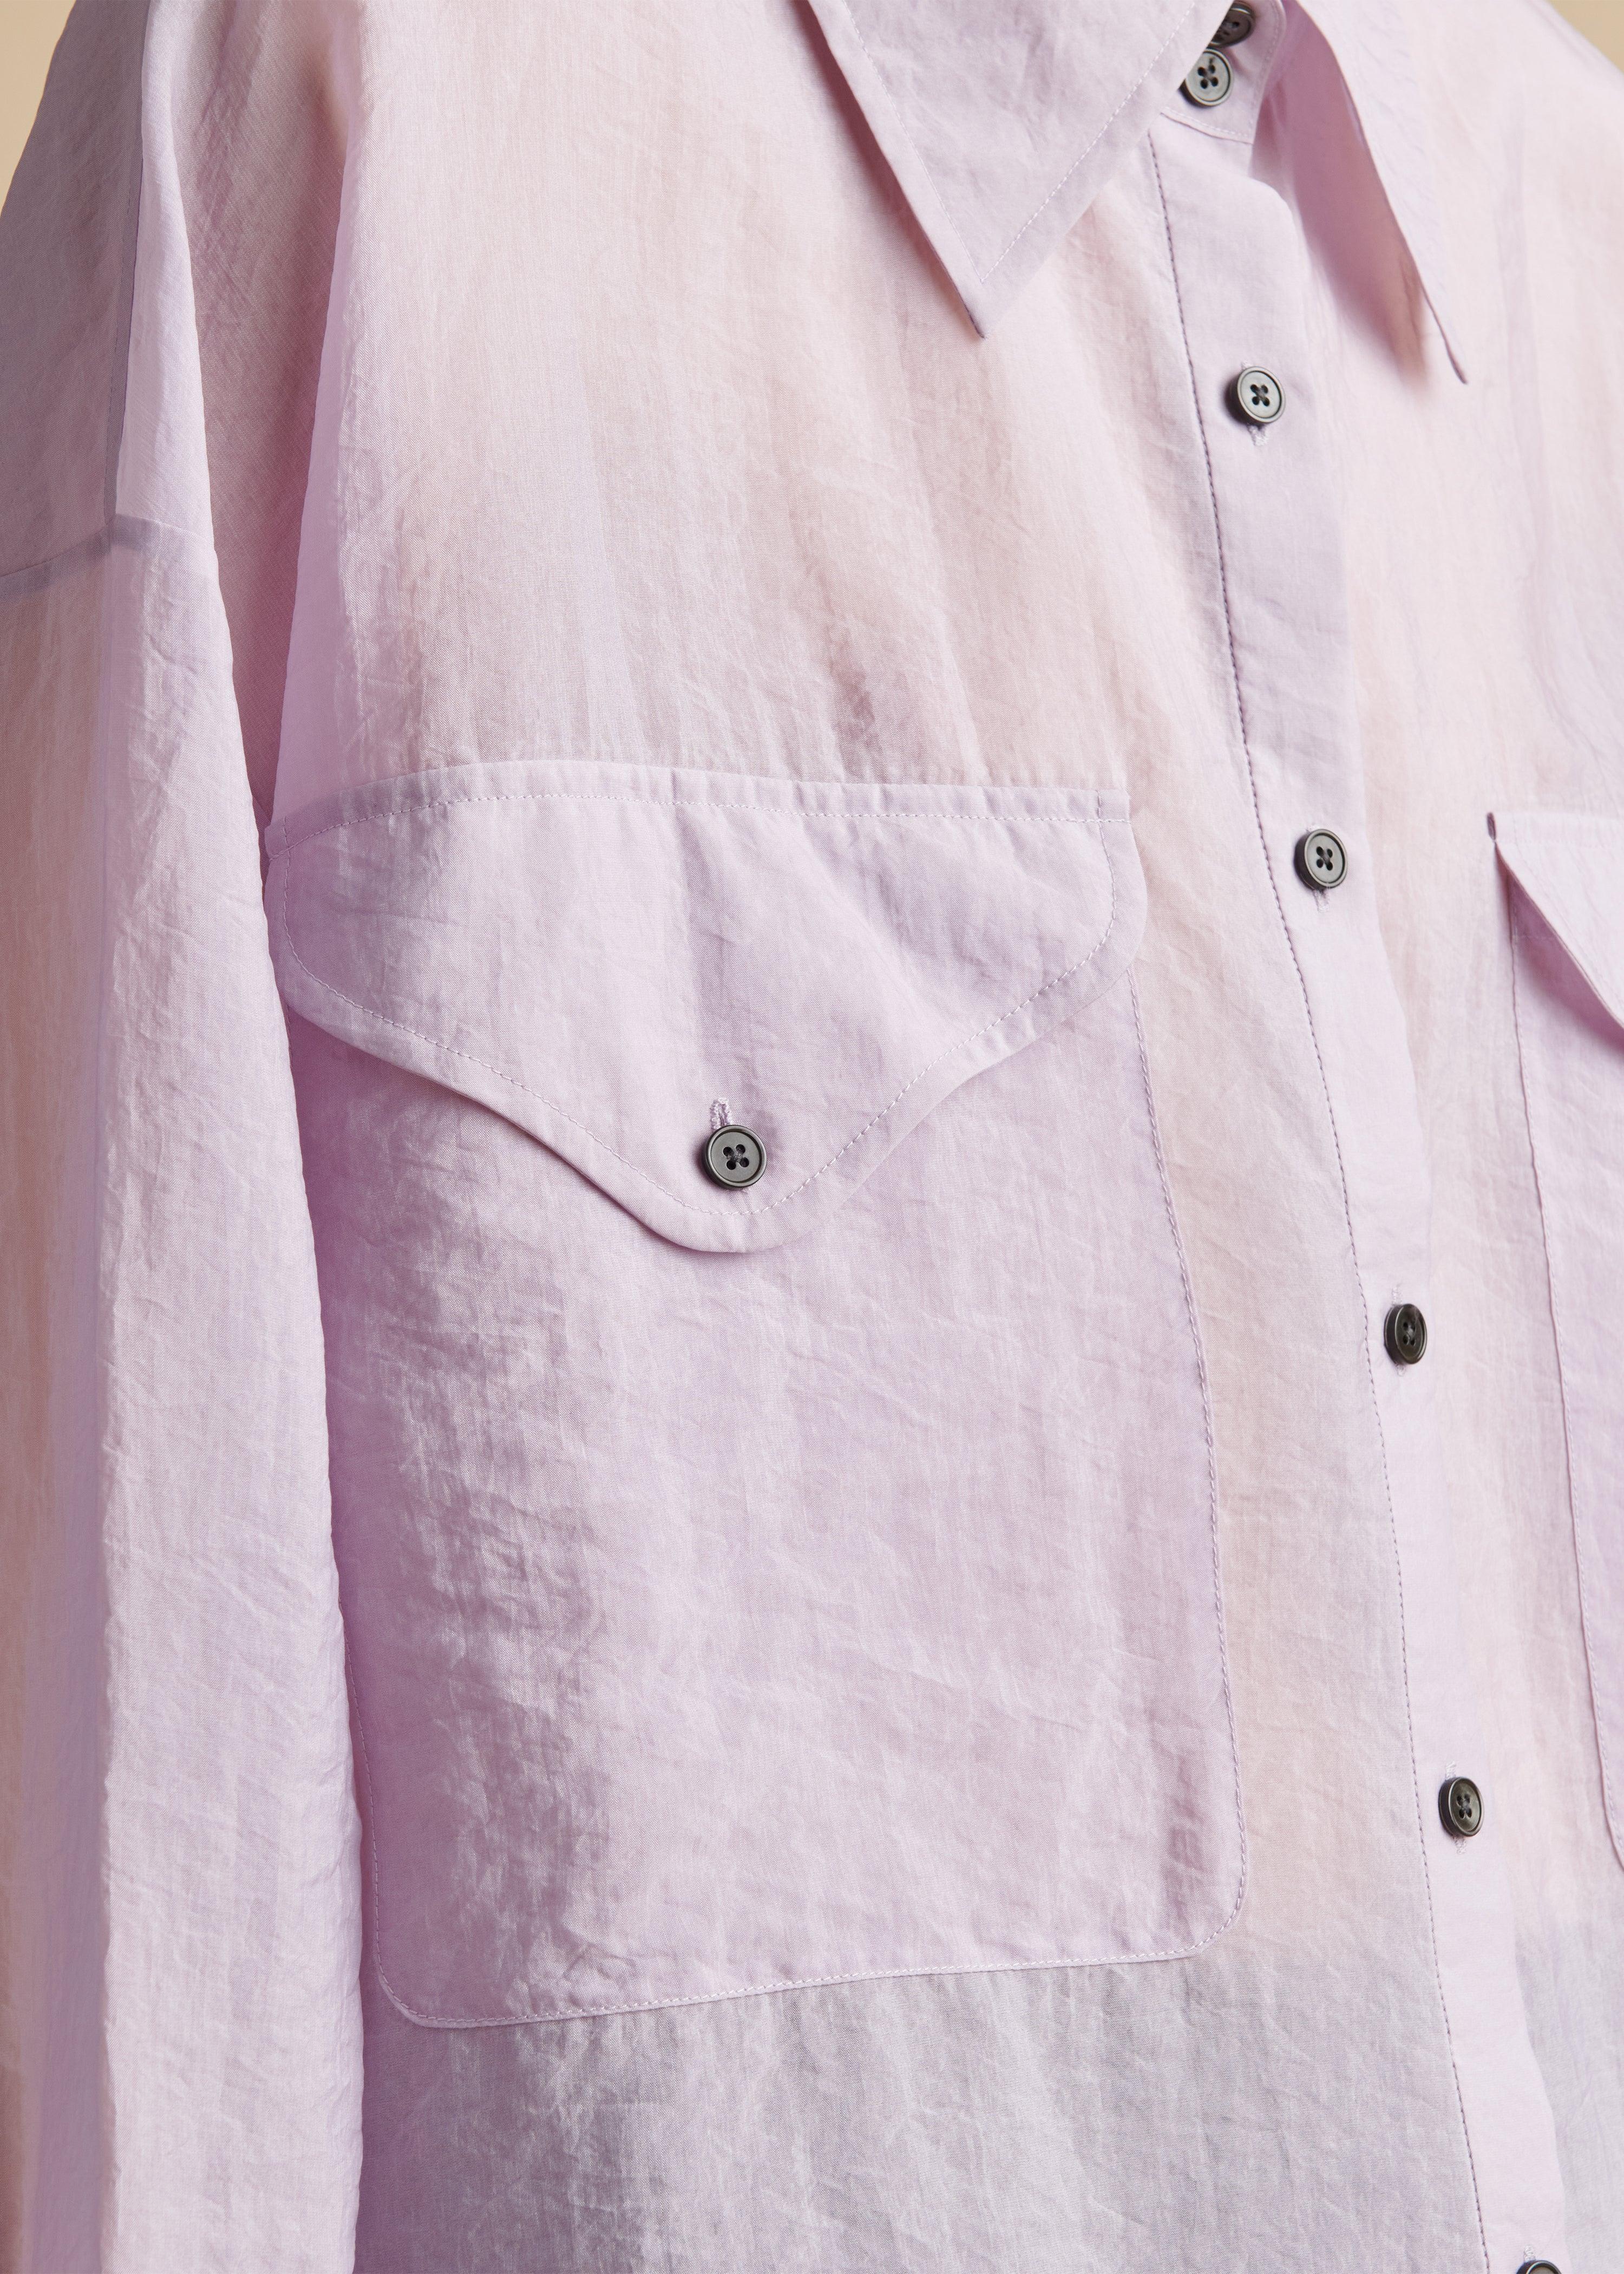 The Birdie Top in Lavender - The Iconic Issue